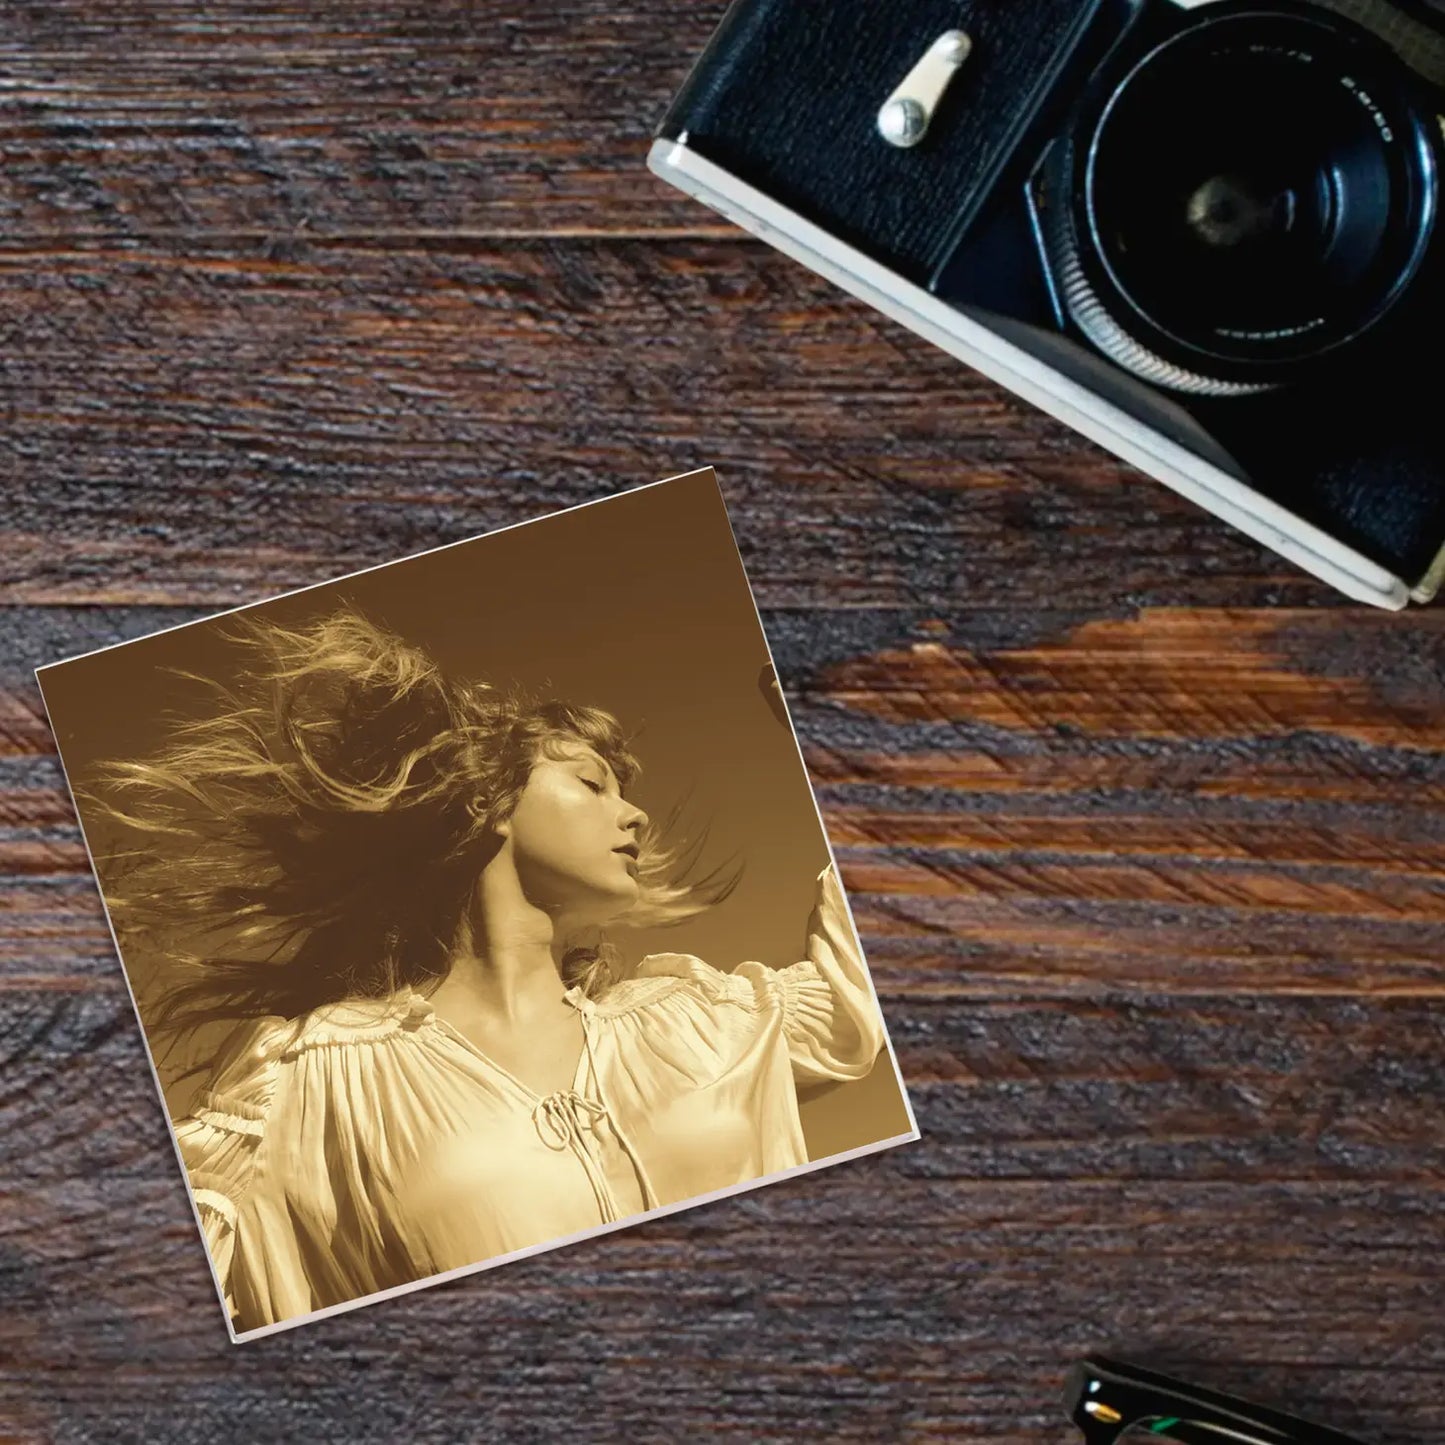 Fearless (Taylor's Version) Taylor Swift Album Coaster